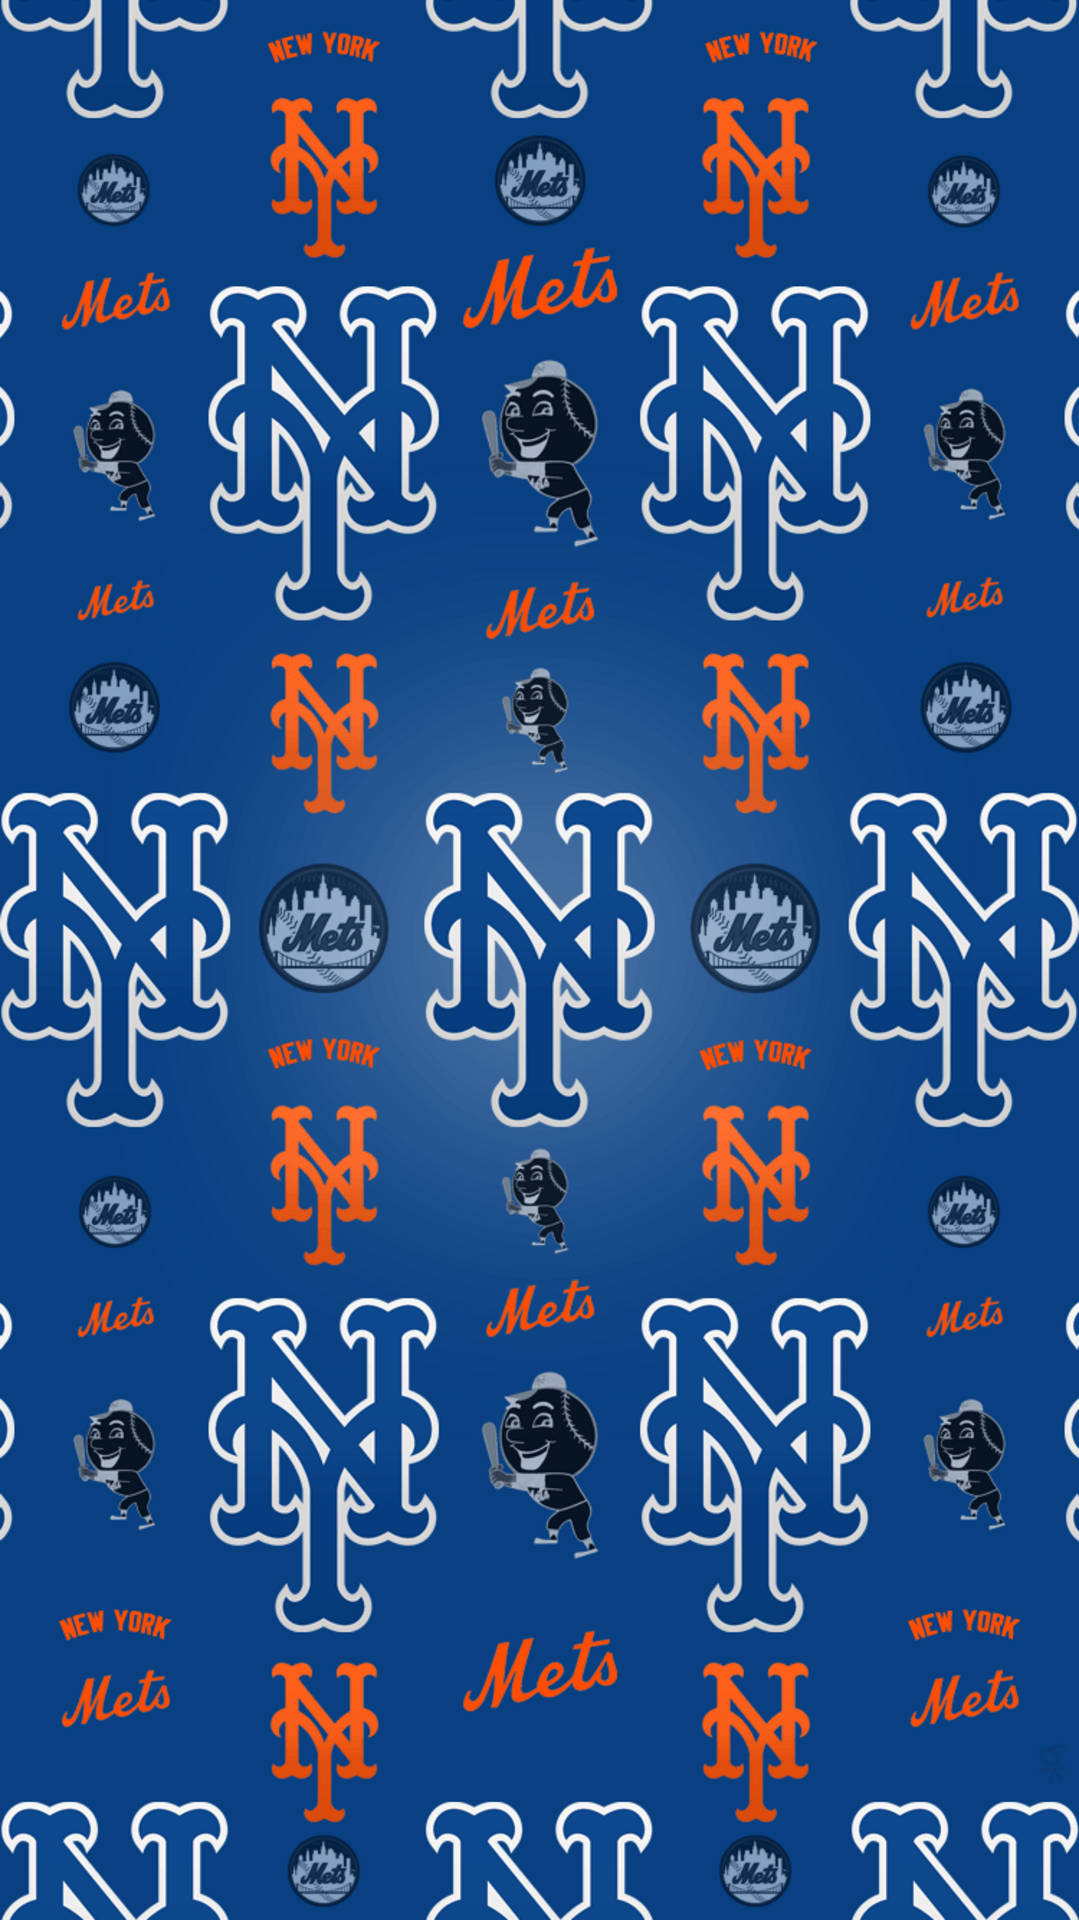 Top 999+ New York Mets Wallpaper Full HD, 4K Free to Use